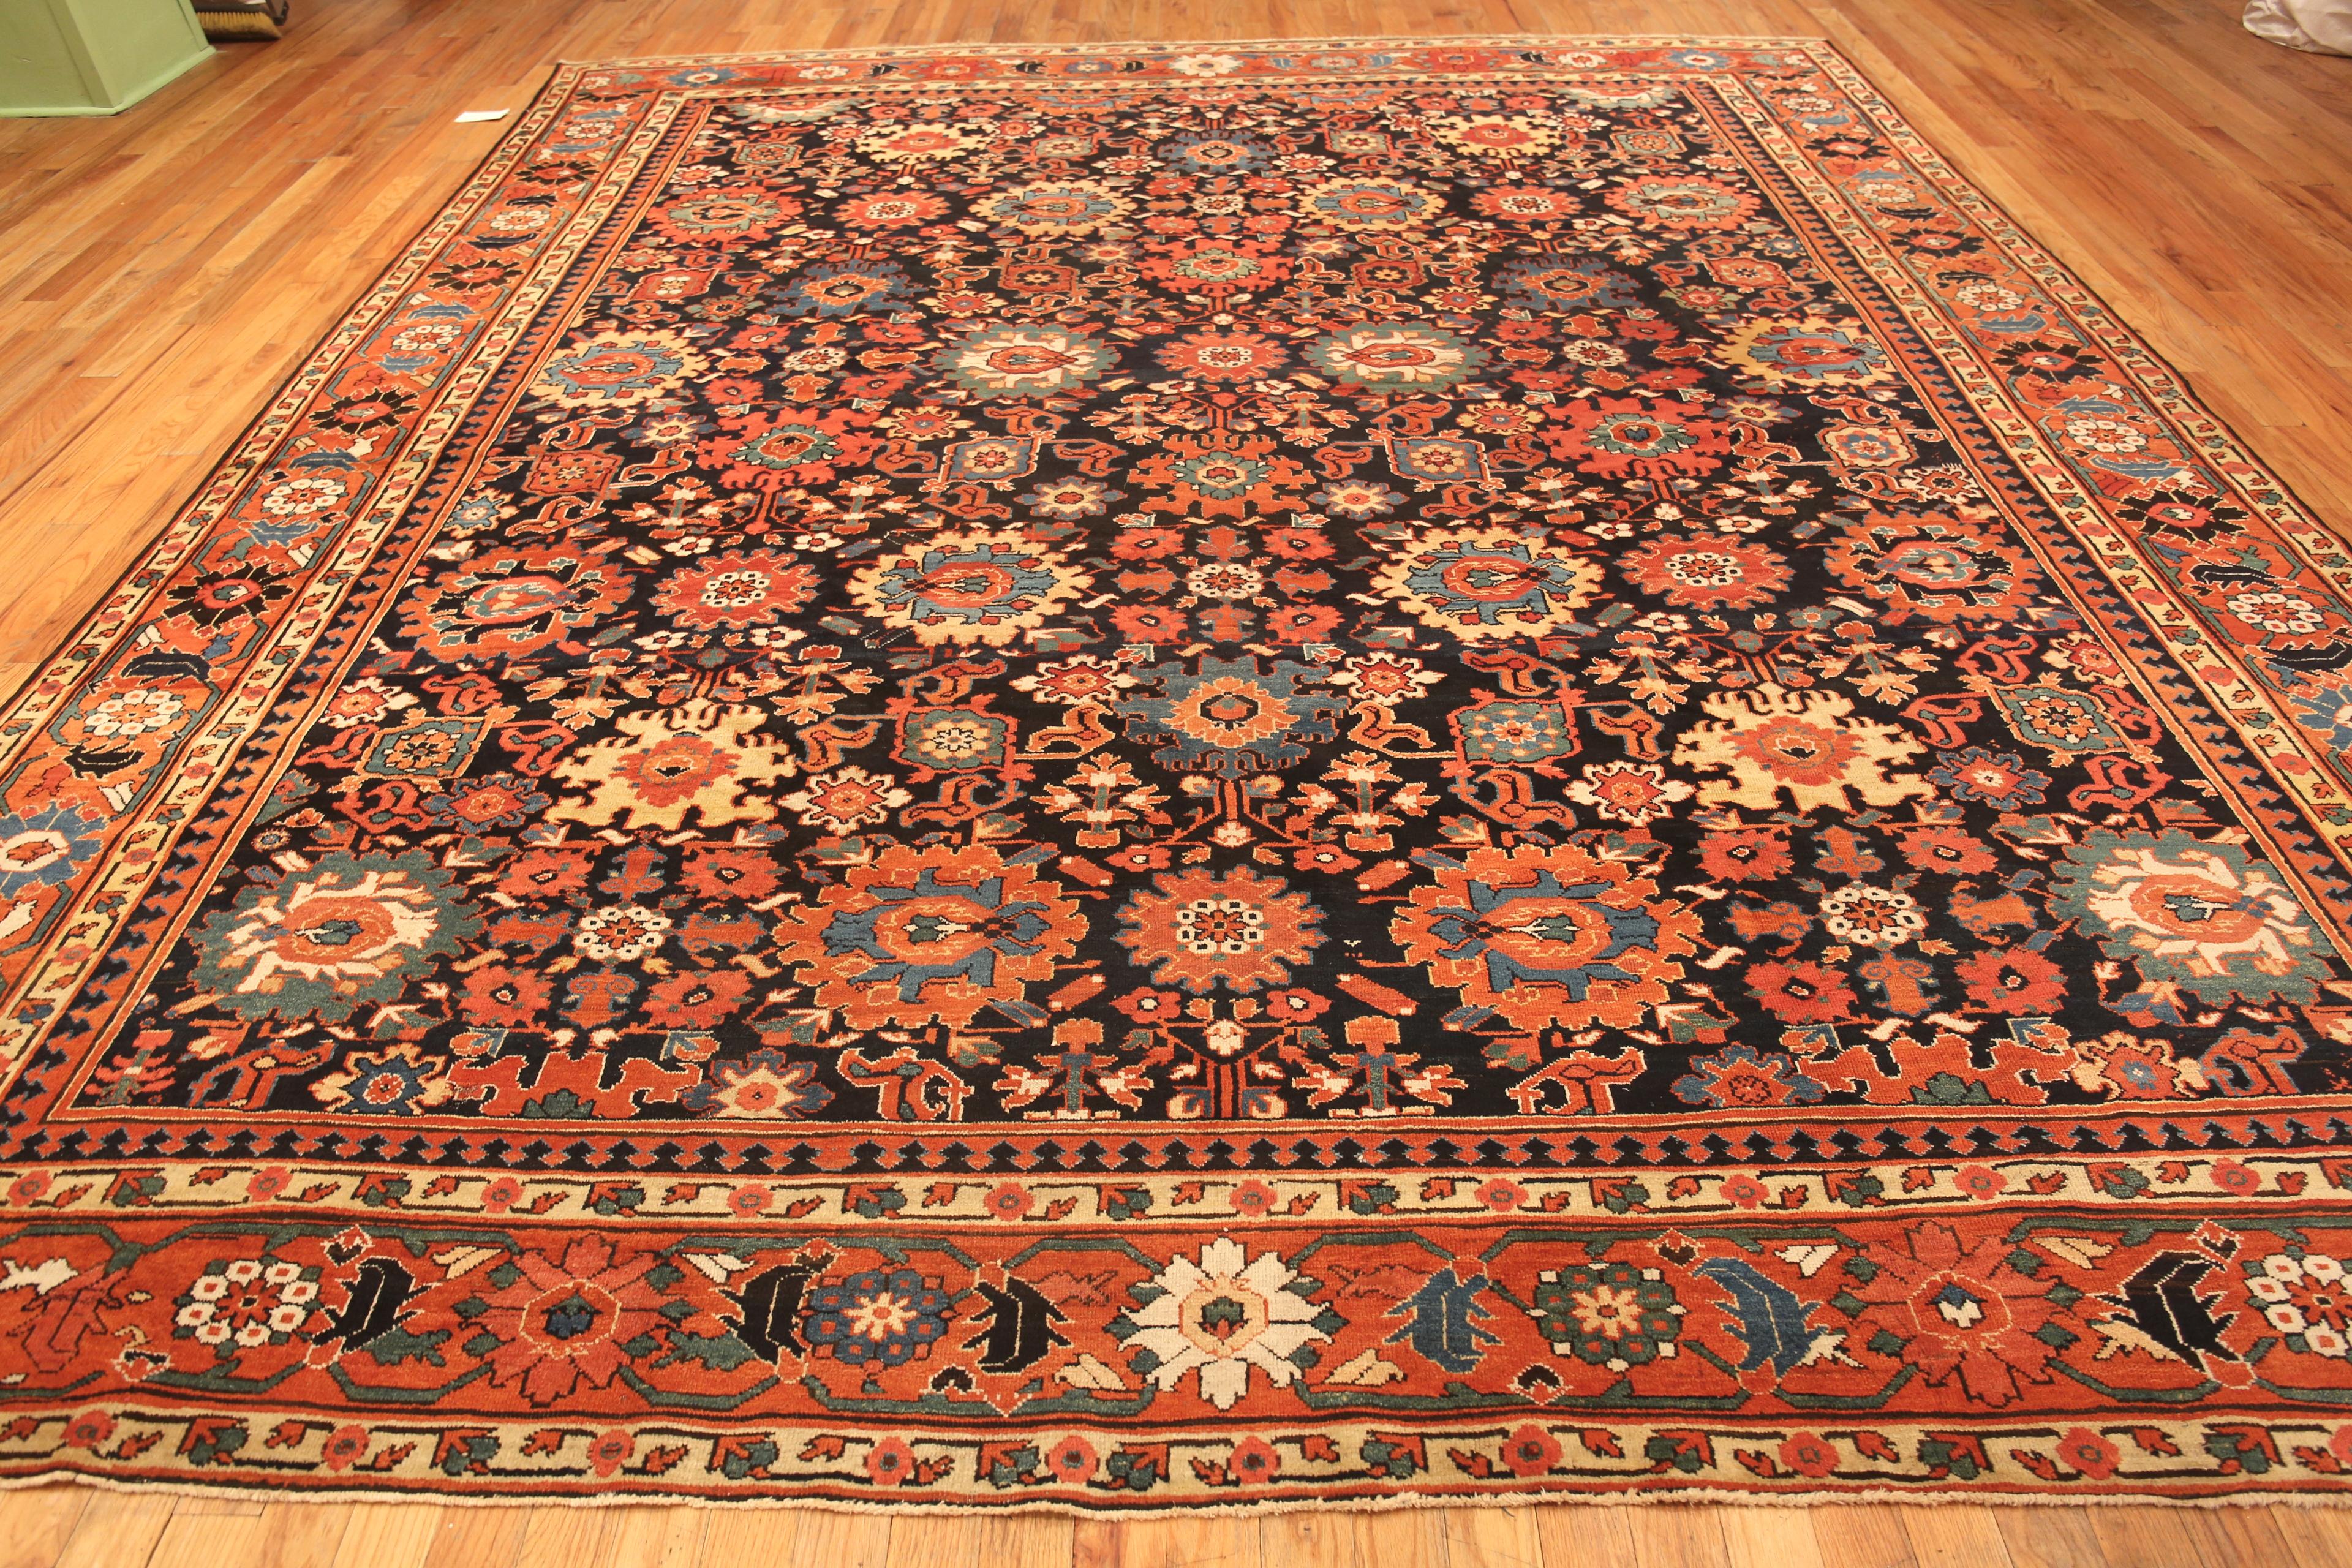 Beautiful Casual Elegant Antique Persian Sultanabad Jewel Tone Rug, Country of Origin: Persia, Circa Date: 1900. Size: 12 ft 1 in x 13 ft 10 in (3.68 m x 4.22 m)

 